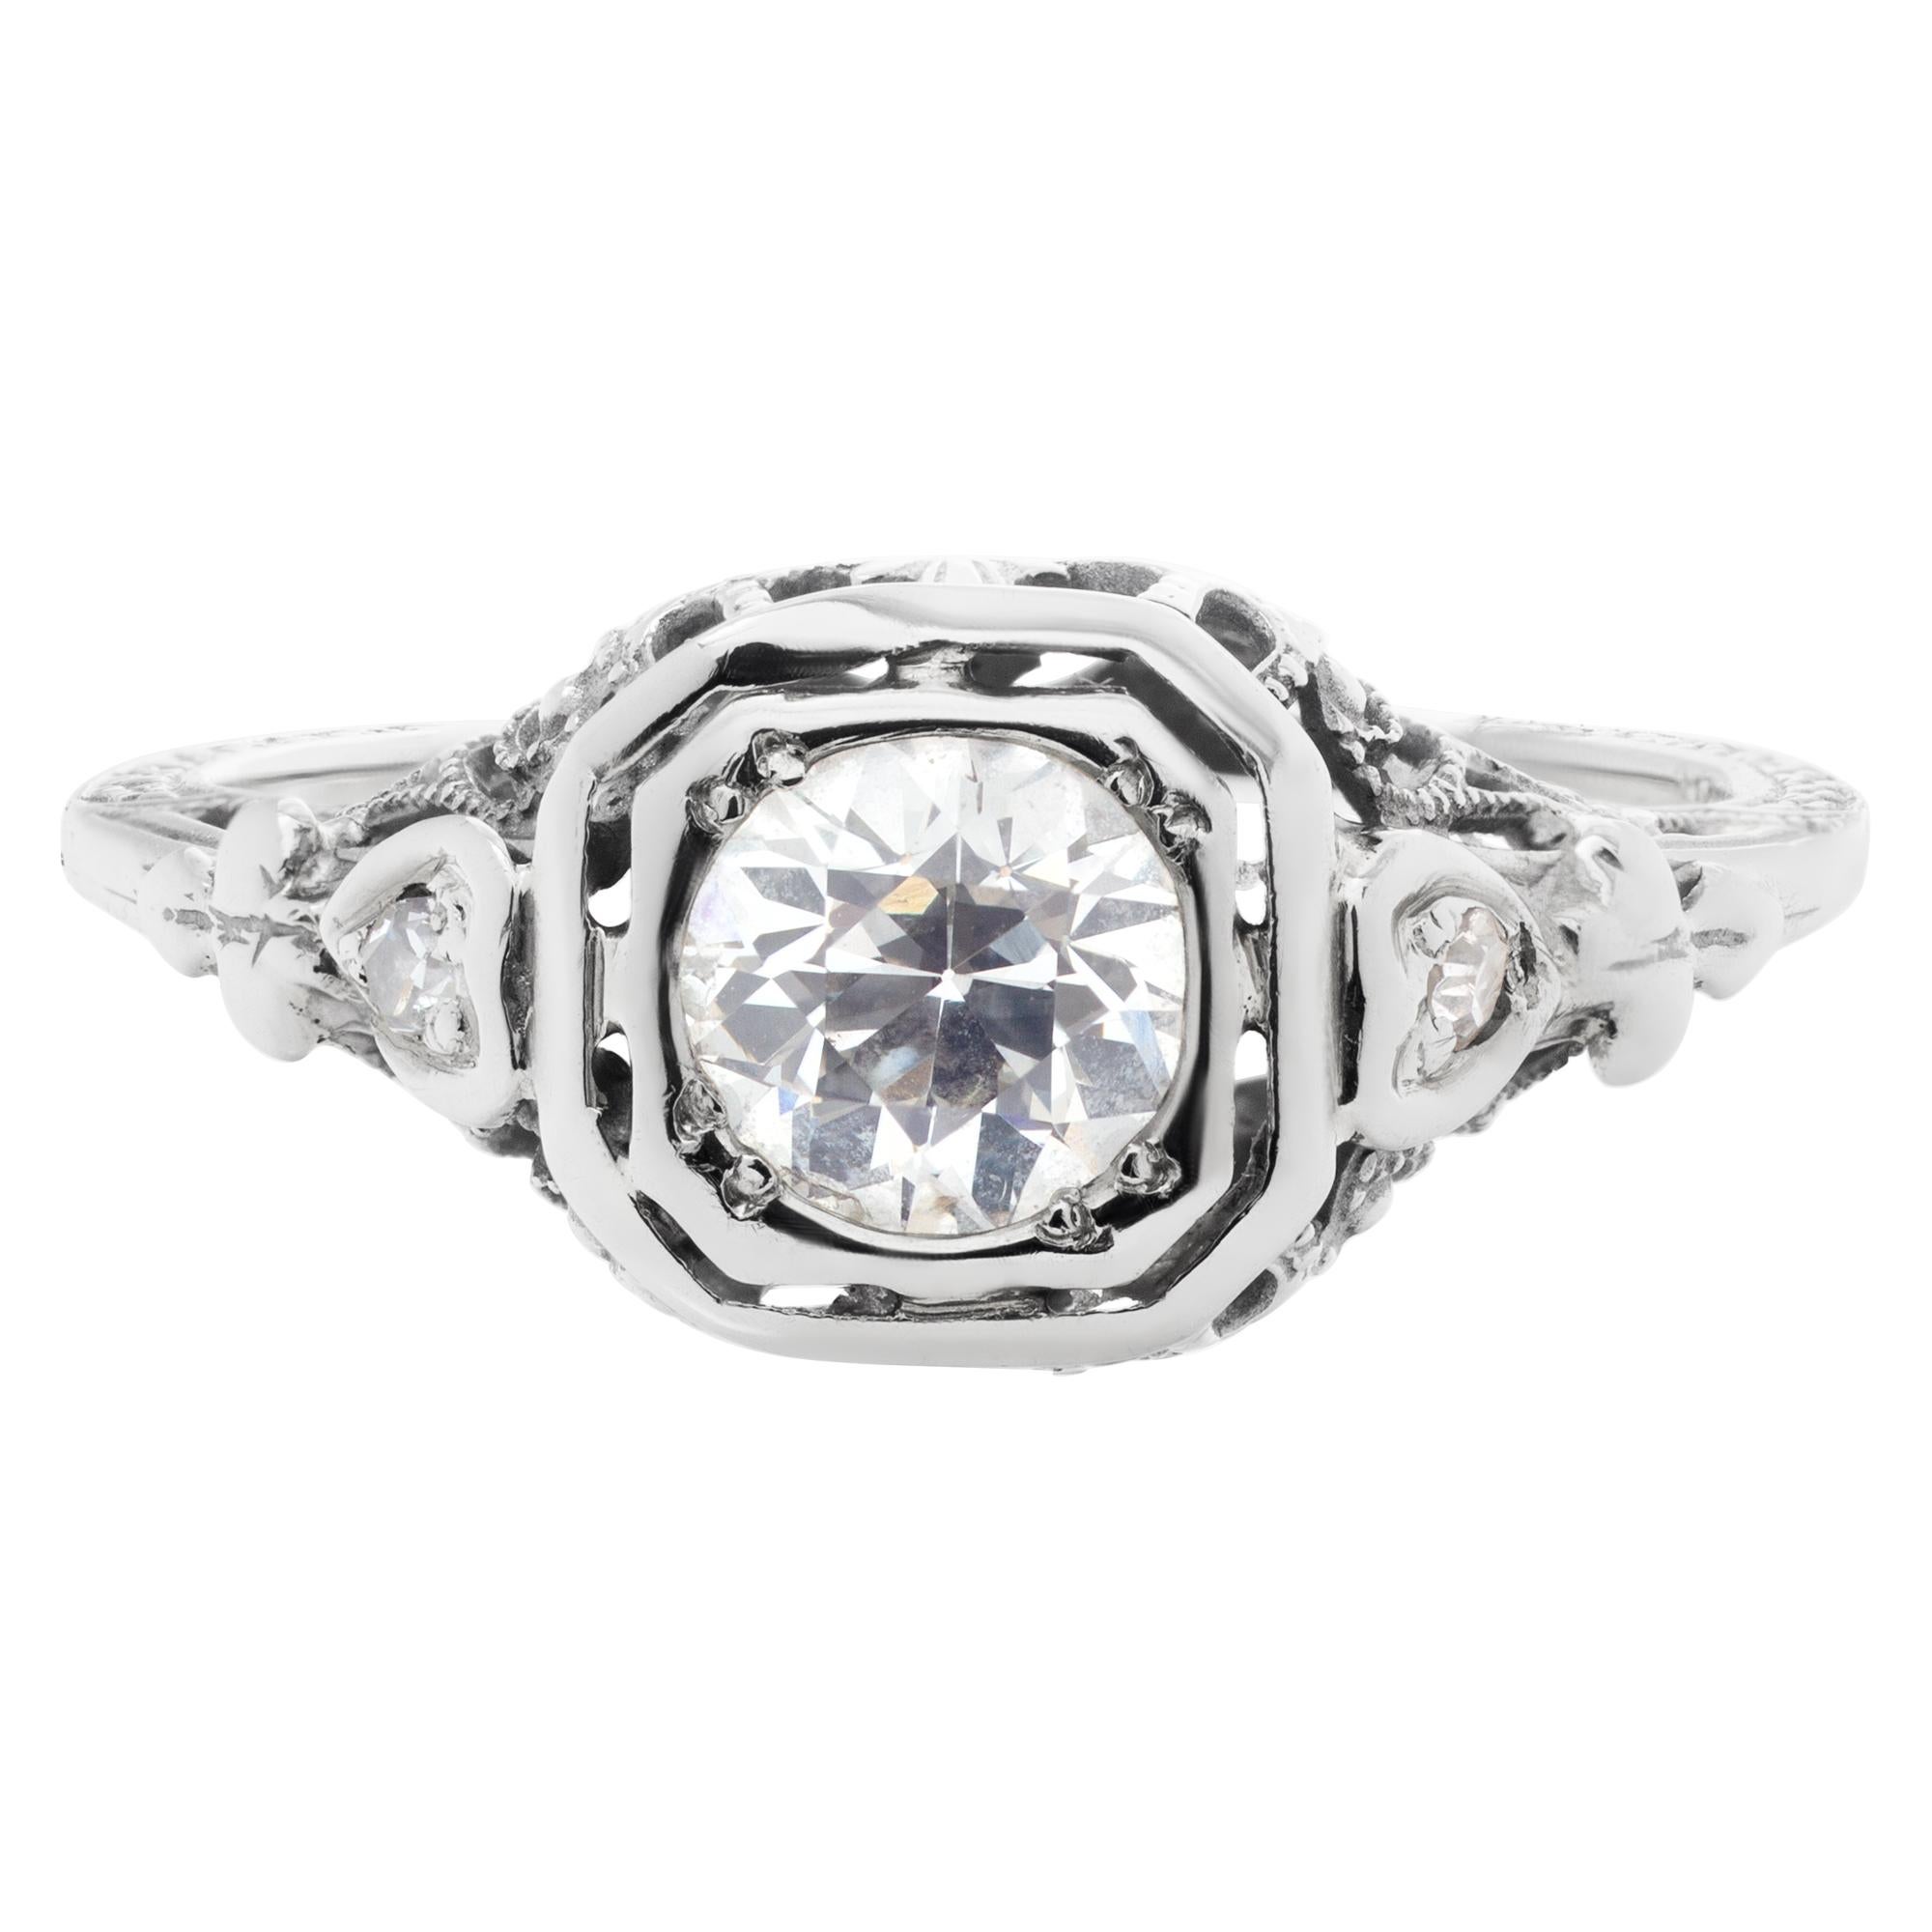 Vintage diamond ring in 14k white gold with app 0.75 carat. Size 5 1/2.<br /><br />This Diamond ring is currently size 5.5 and some items can be sized up or down, please ask! It weighs 1.4 pennyweights and is 14k White Gold.
